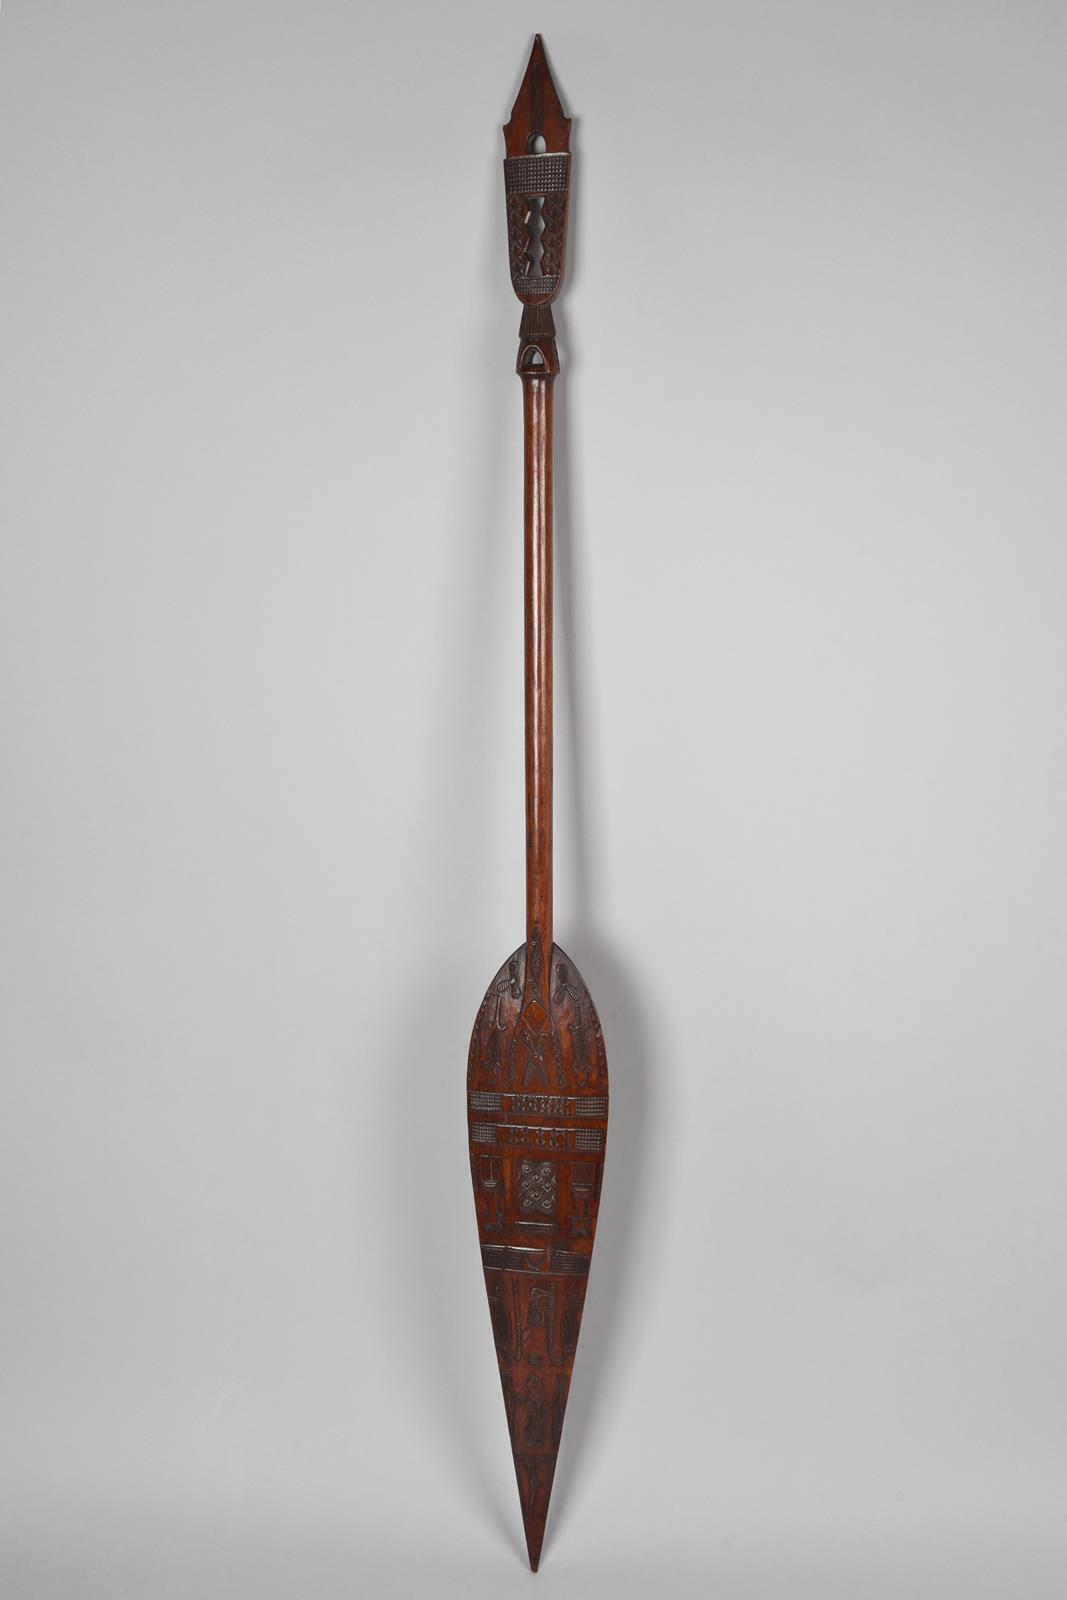 A Duala paddle Cameroon the blade with low relief carving of animals, padlocks, keys, scissors, - Image 3 of 5